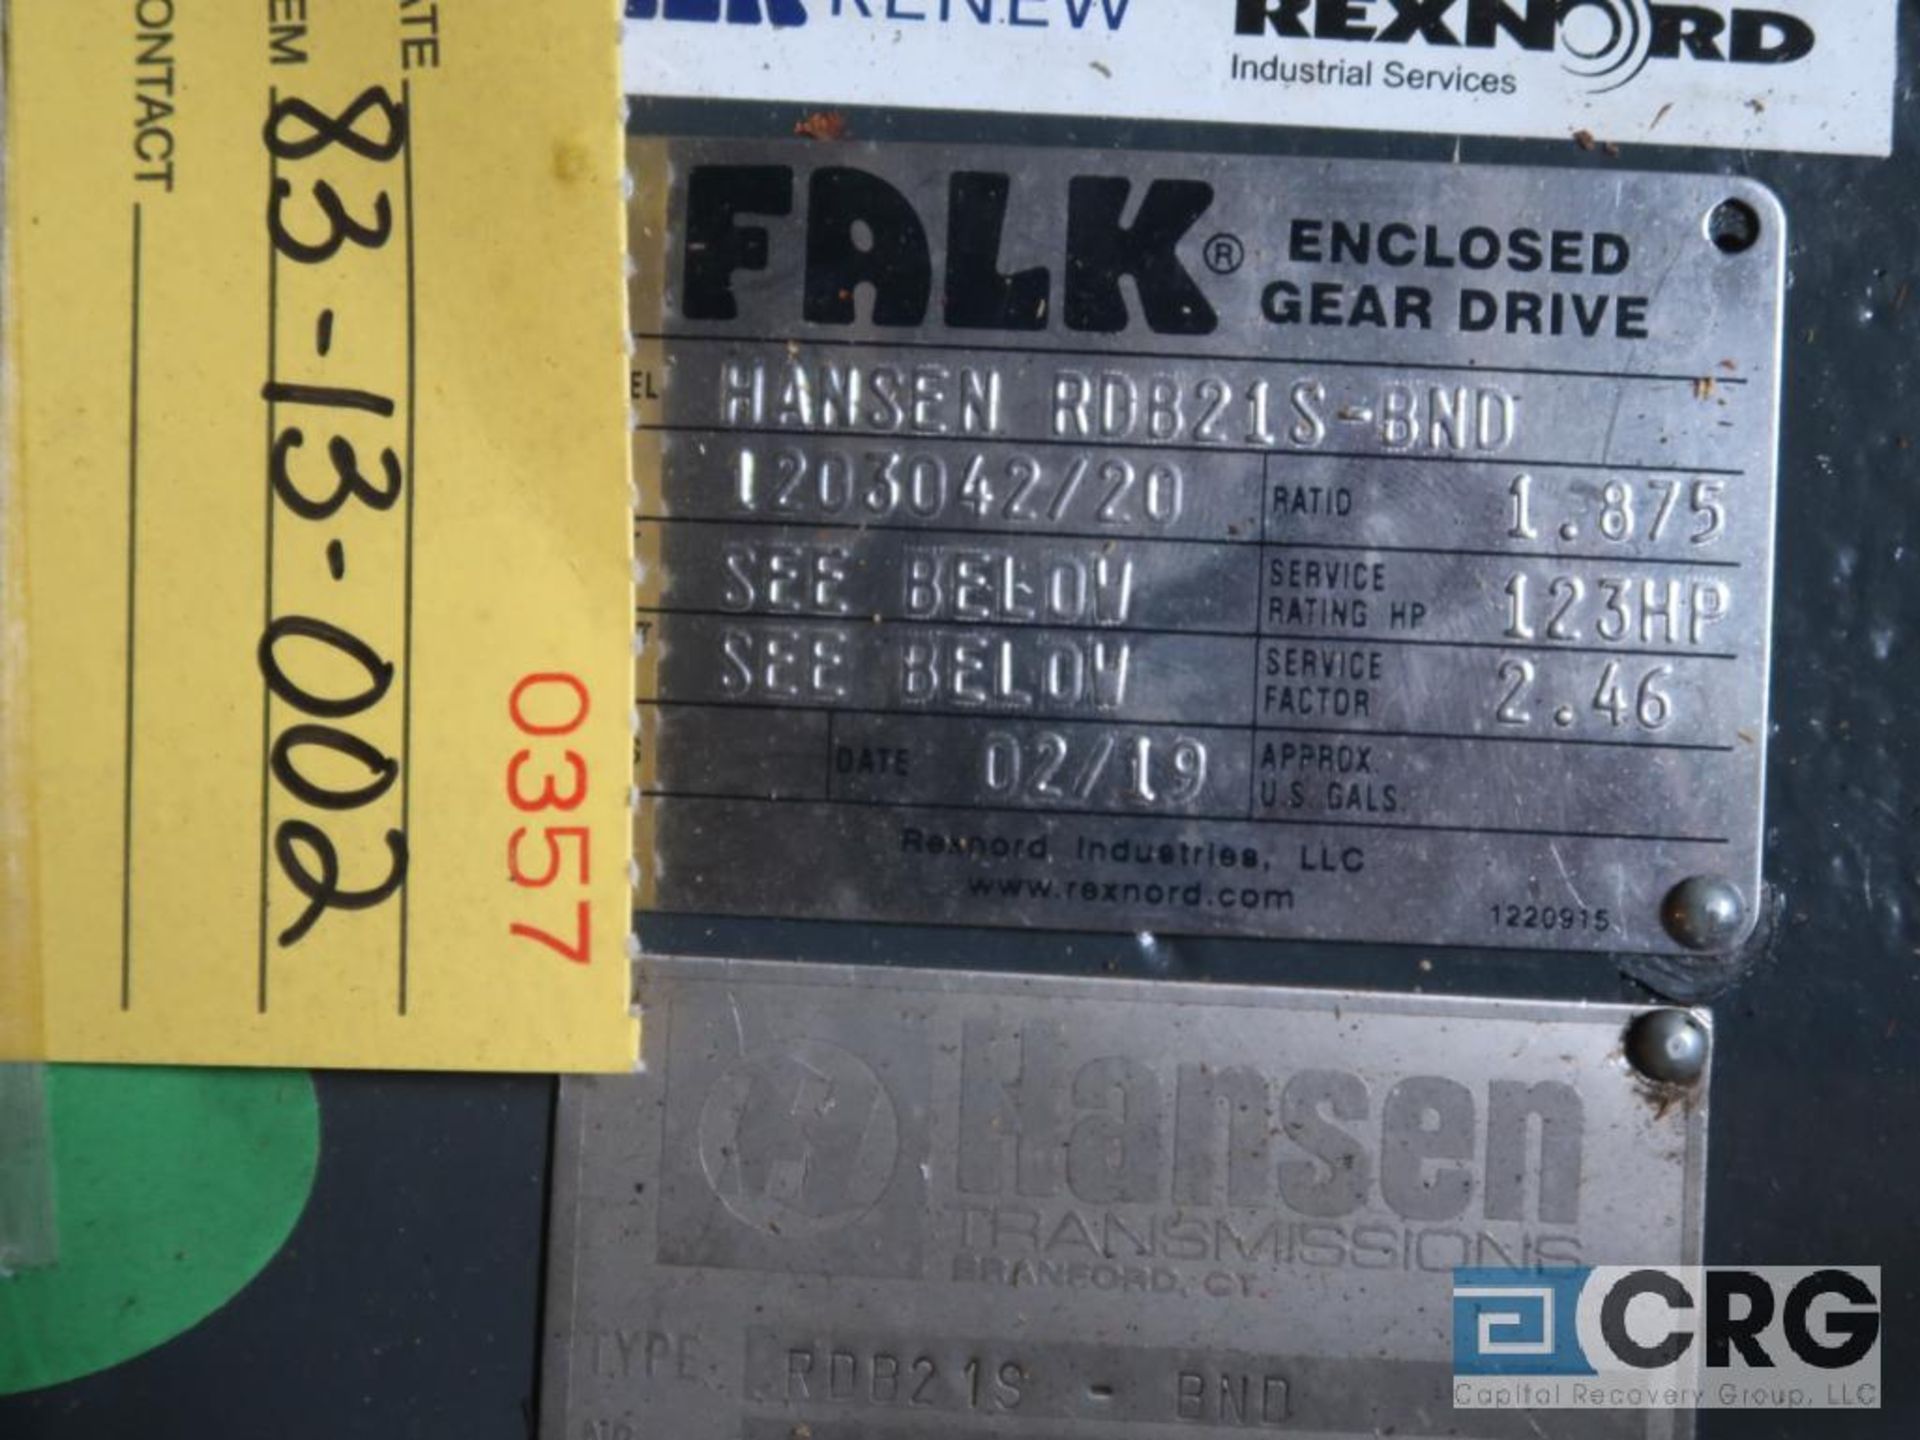 Falk/Hansen RD821S BND gear drive, ratio-1.875, RPM 1,790/143/954, service rate HP. 125 (Next Bay - Image 3 of 3